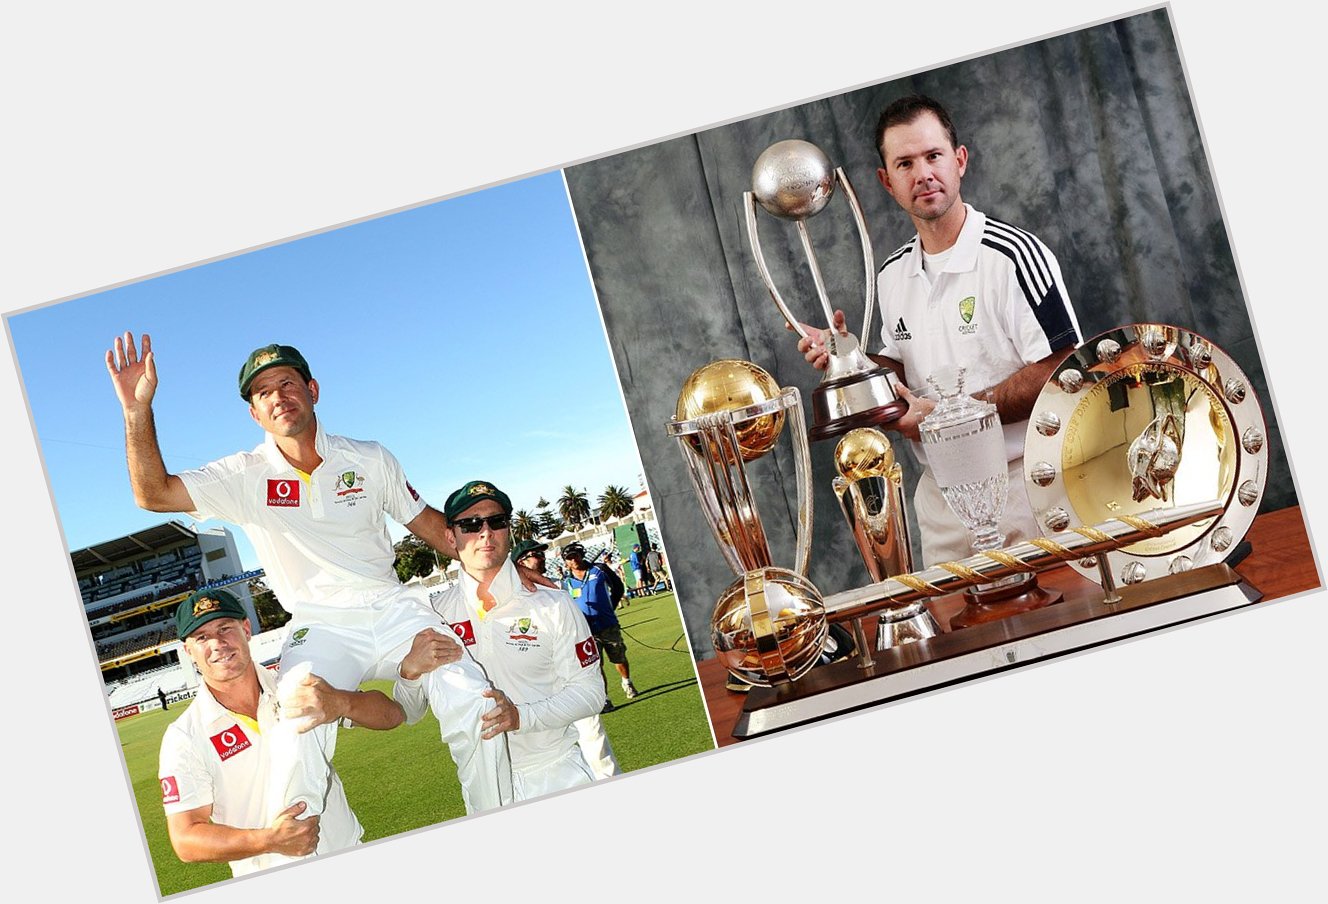 377 victories, 71 centuries and 27,483 runs for Australia. 
Happy 41st birthday Ricky Ponting! 